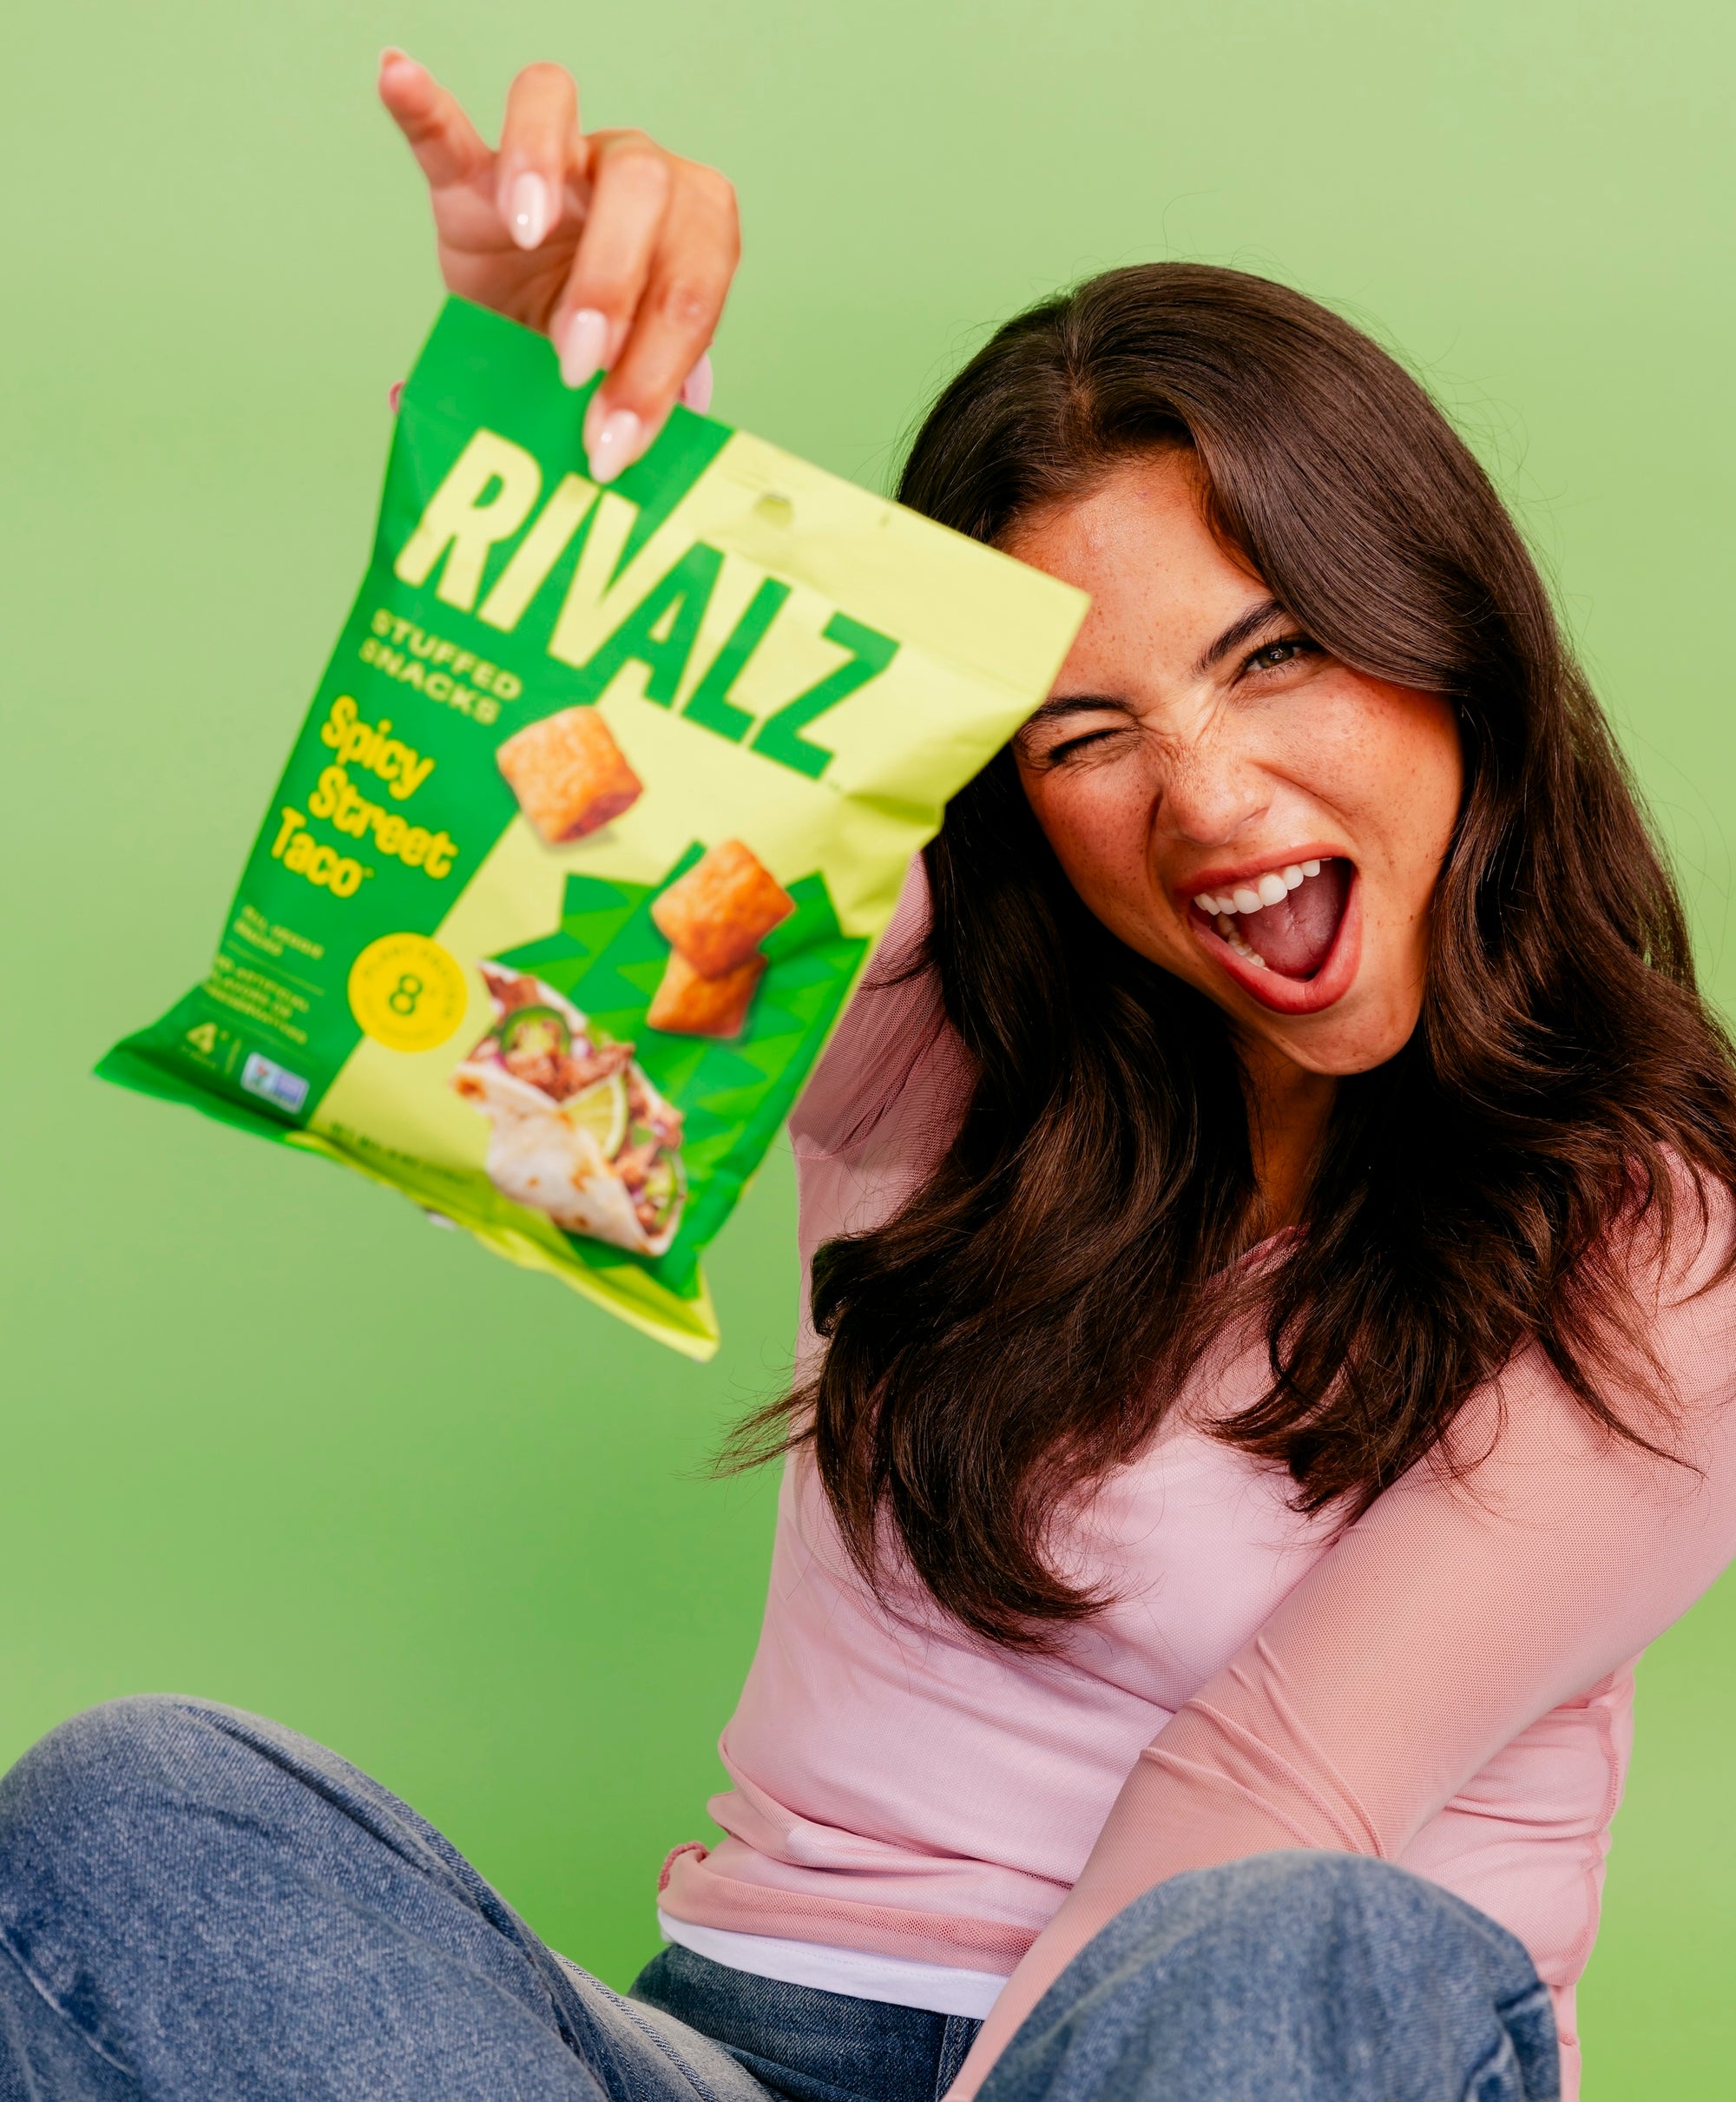 Skandia Shafer with a bag of Rivalz Spicy Street Taco vegan snack